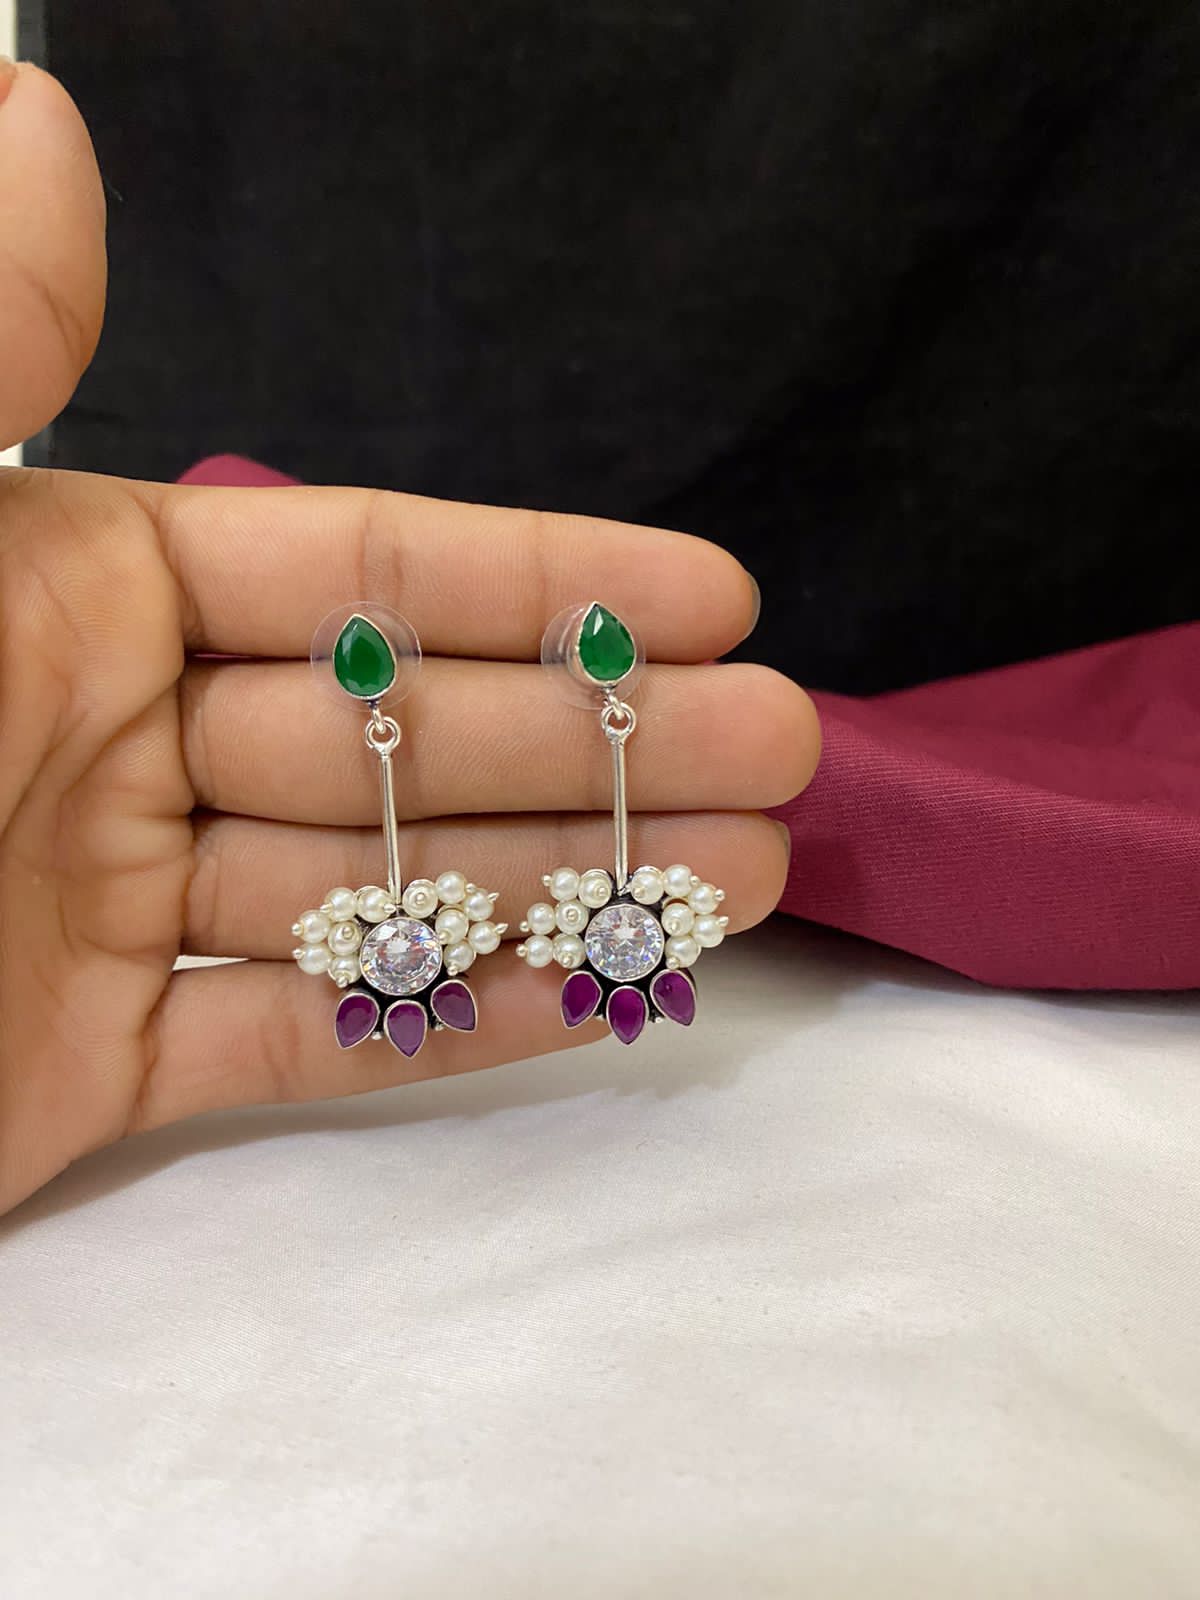 Sparsh "Red & Green Hanging Earrings with Moti Accents"